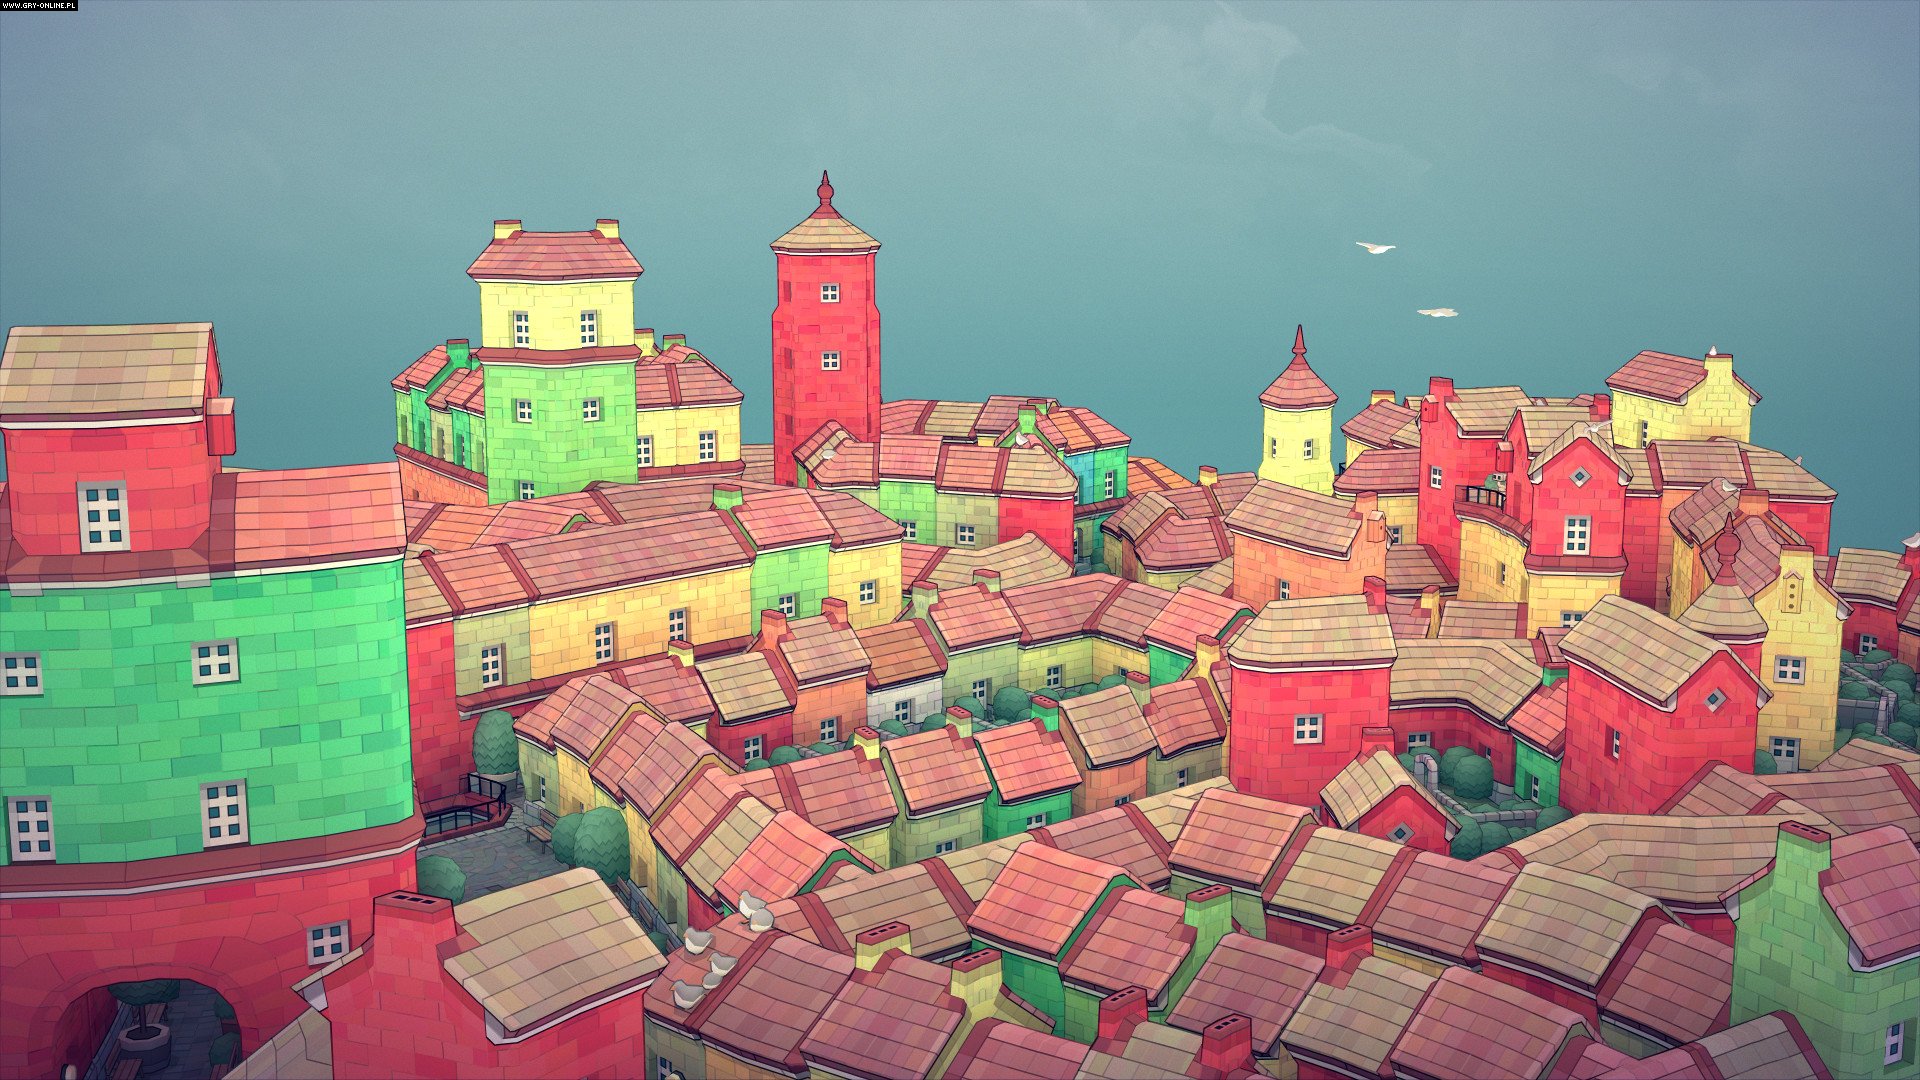 townscaper game free